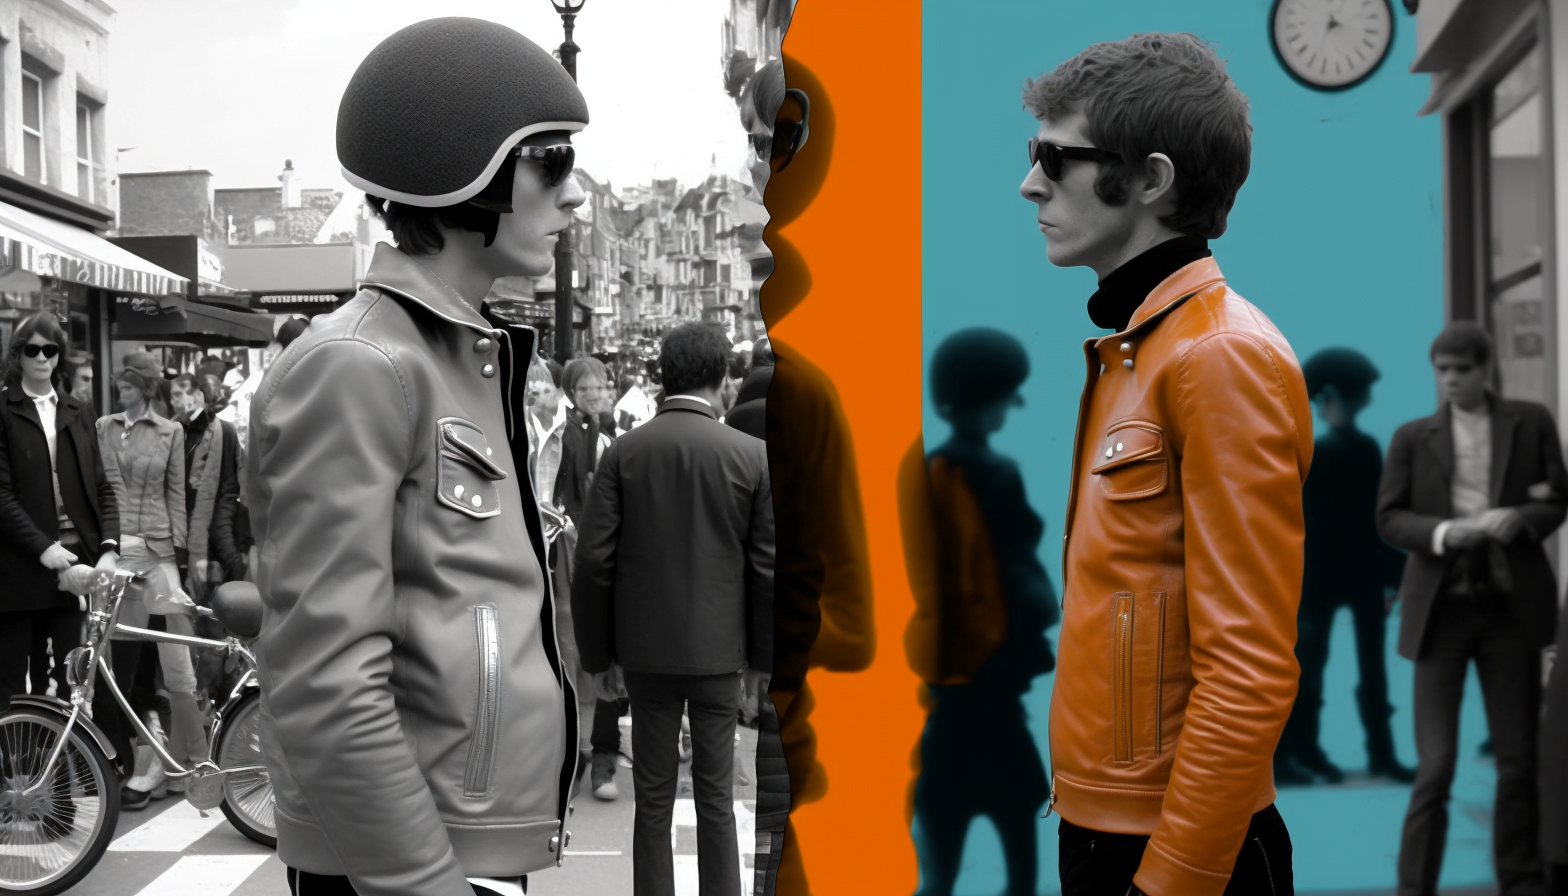 The Moral Panic of Mods and Rockers: How a Clash of Subcultures